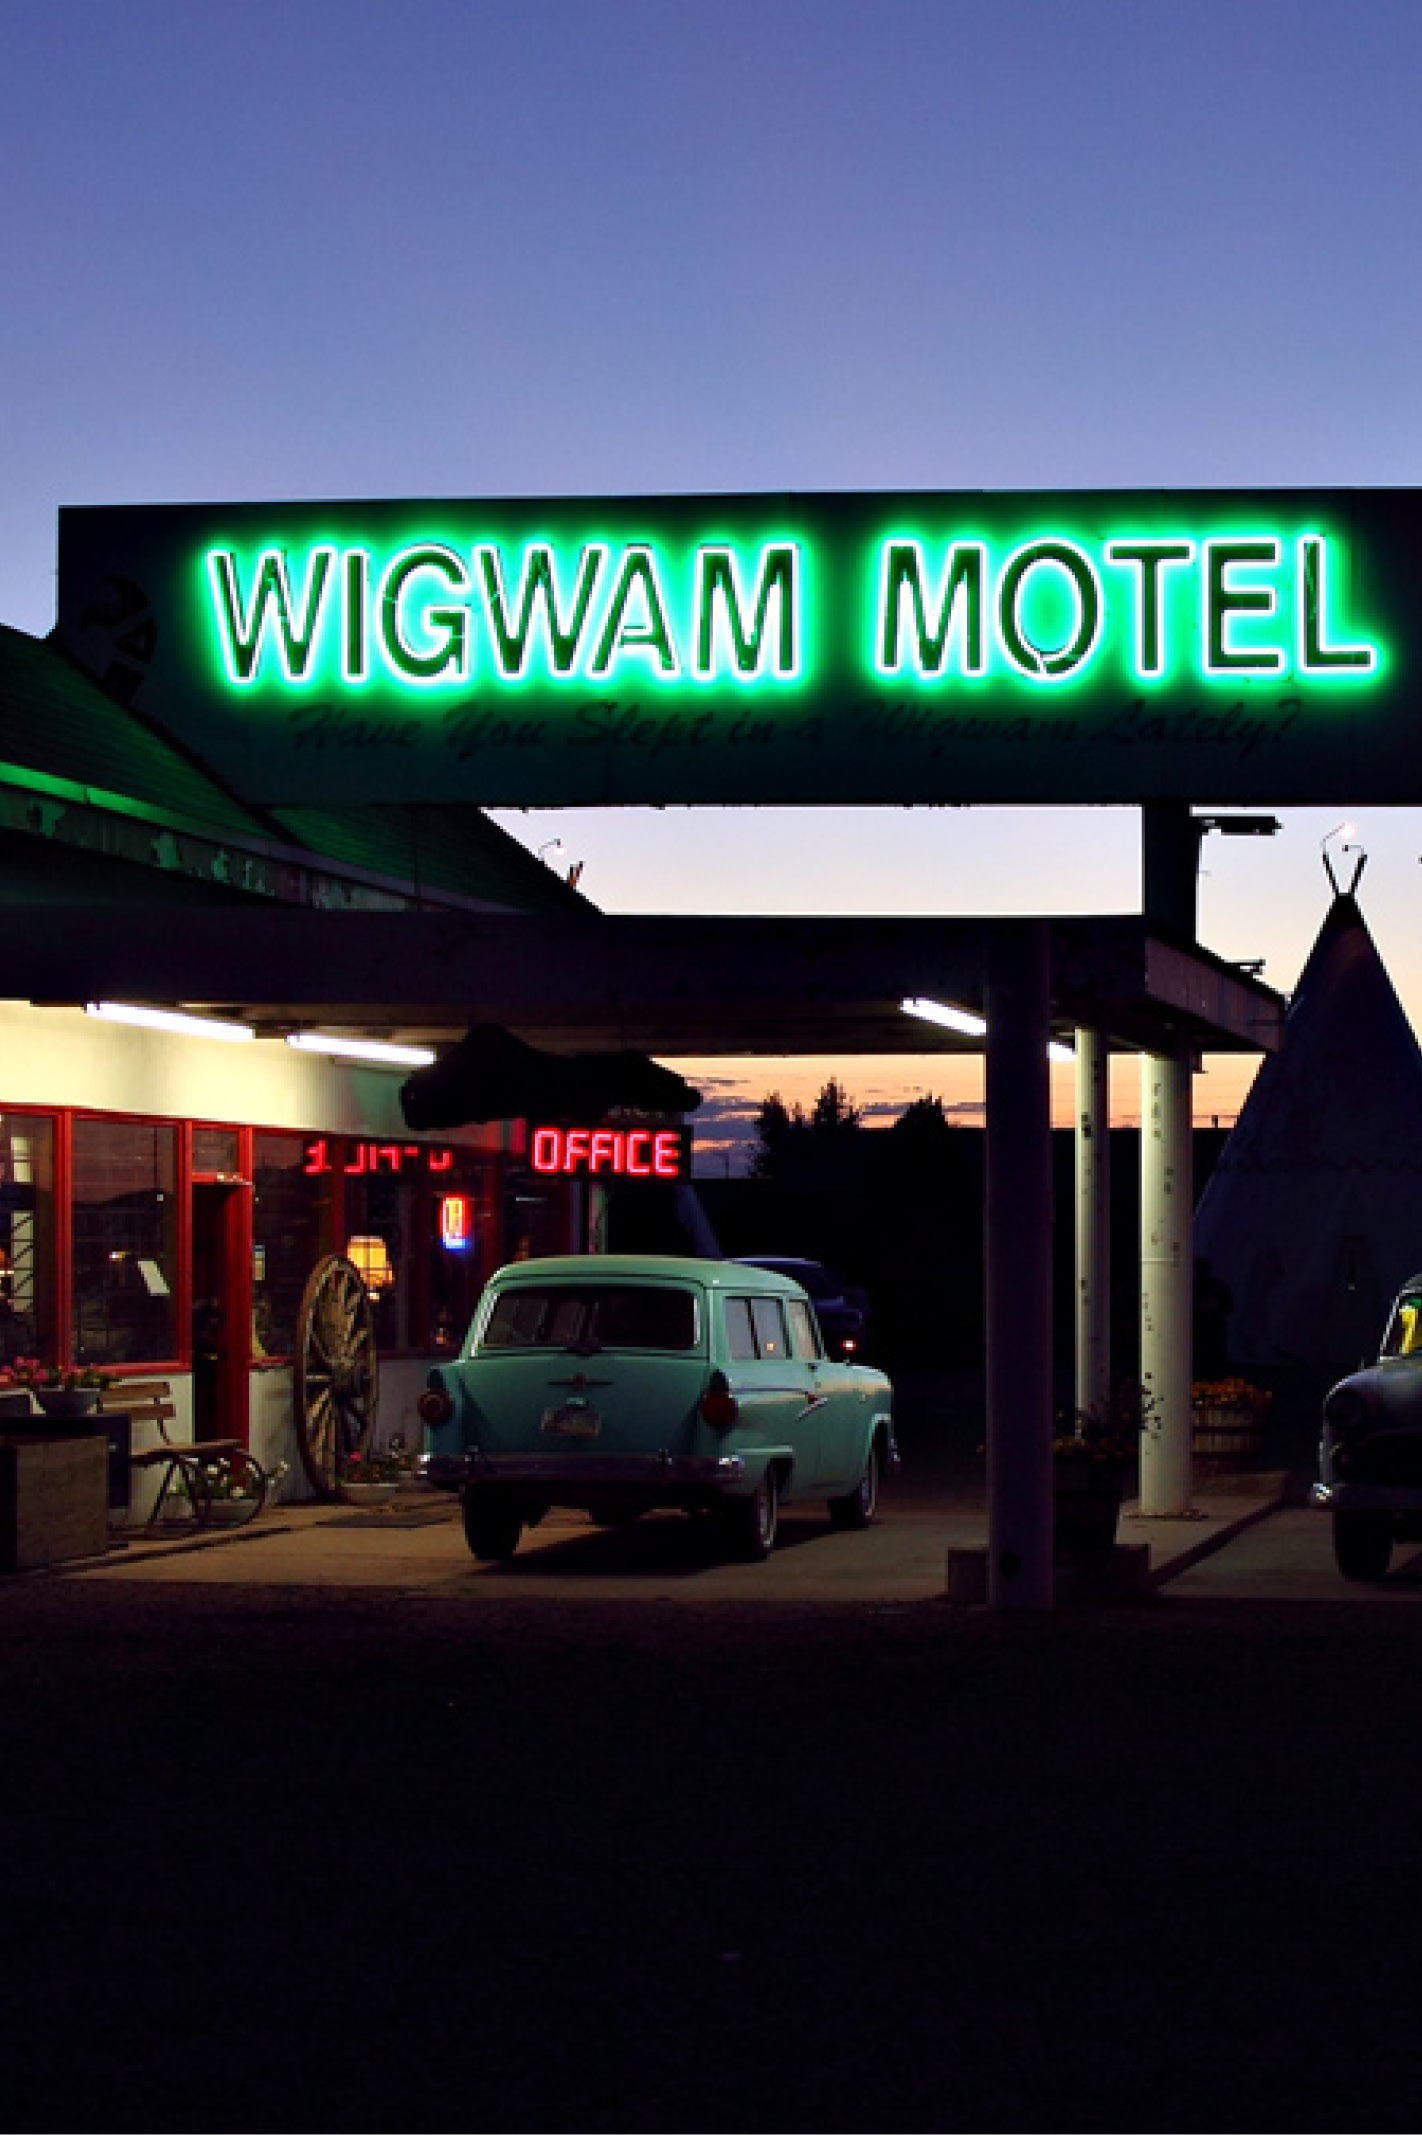 Wigwam motel with classic cars parked outside evening sky